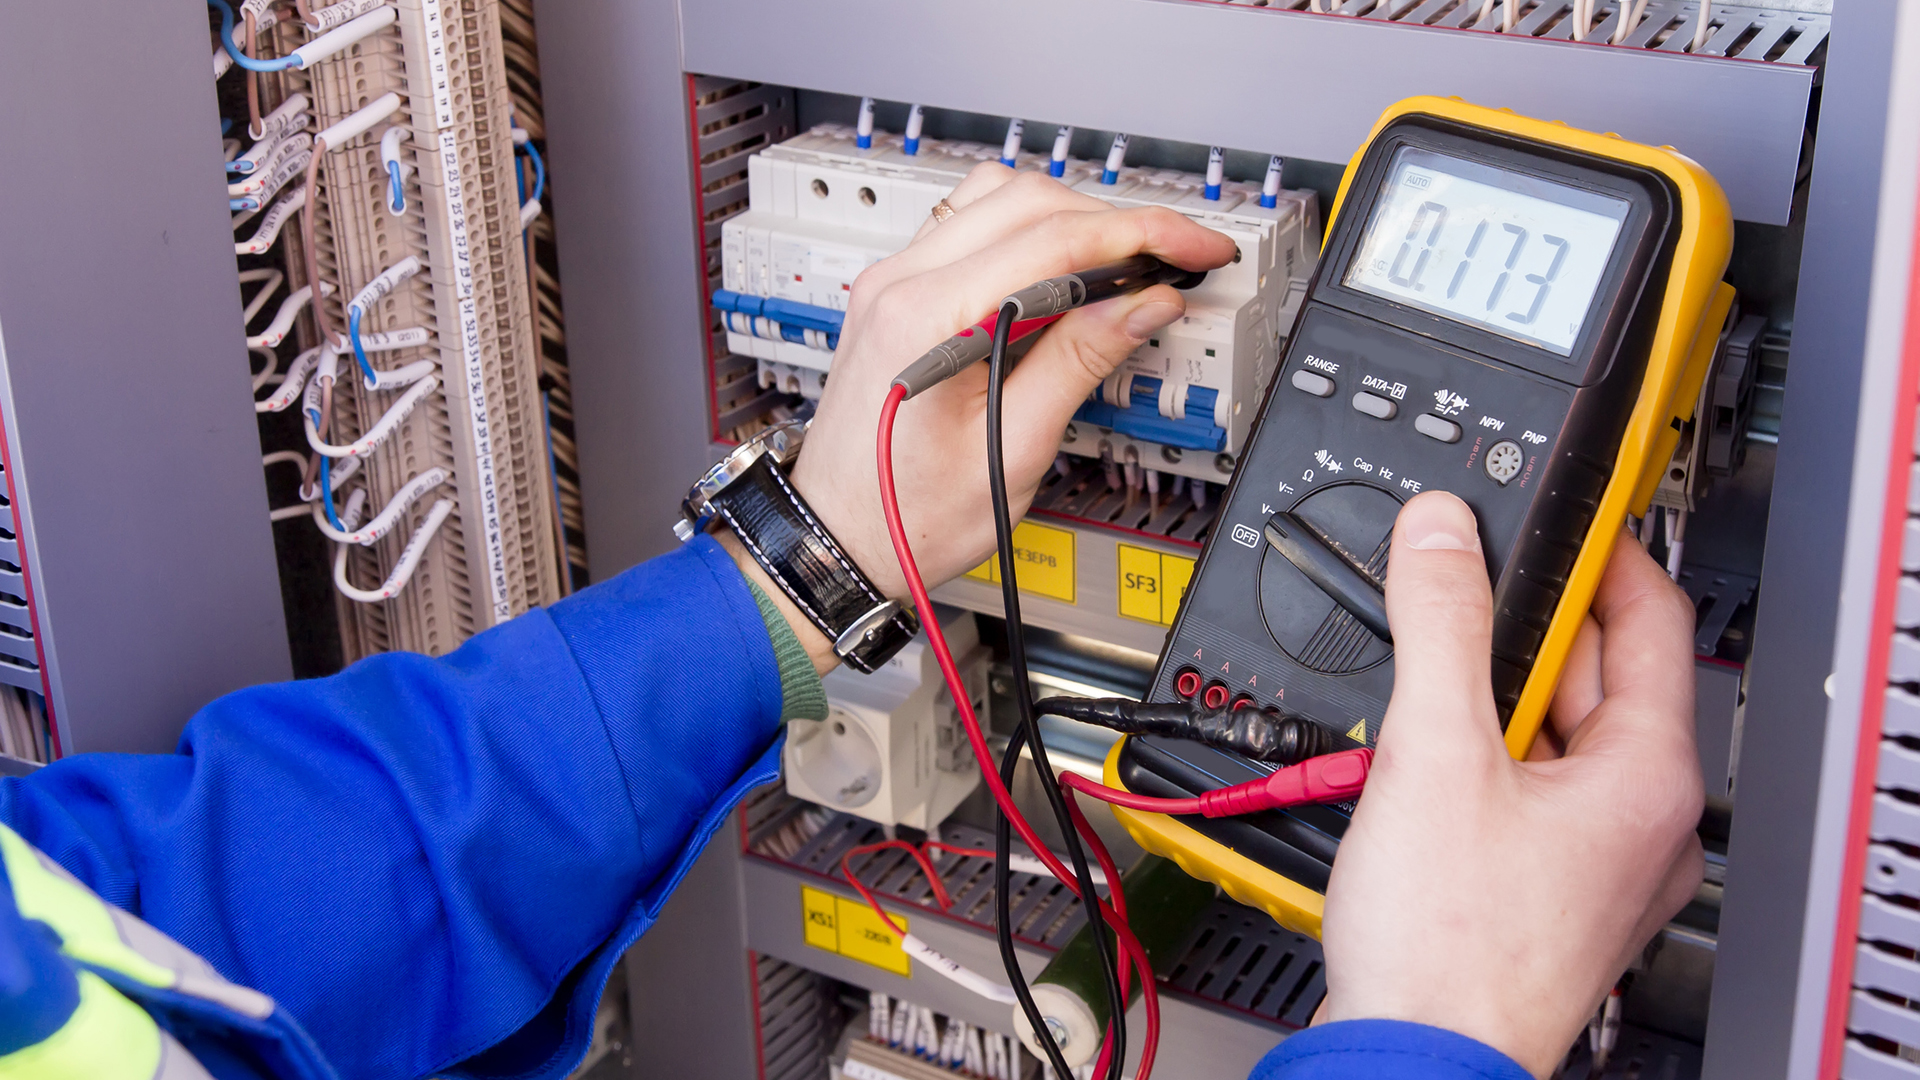 Student uses a multimeter on an electrical device